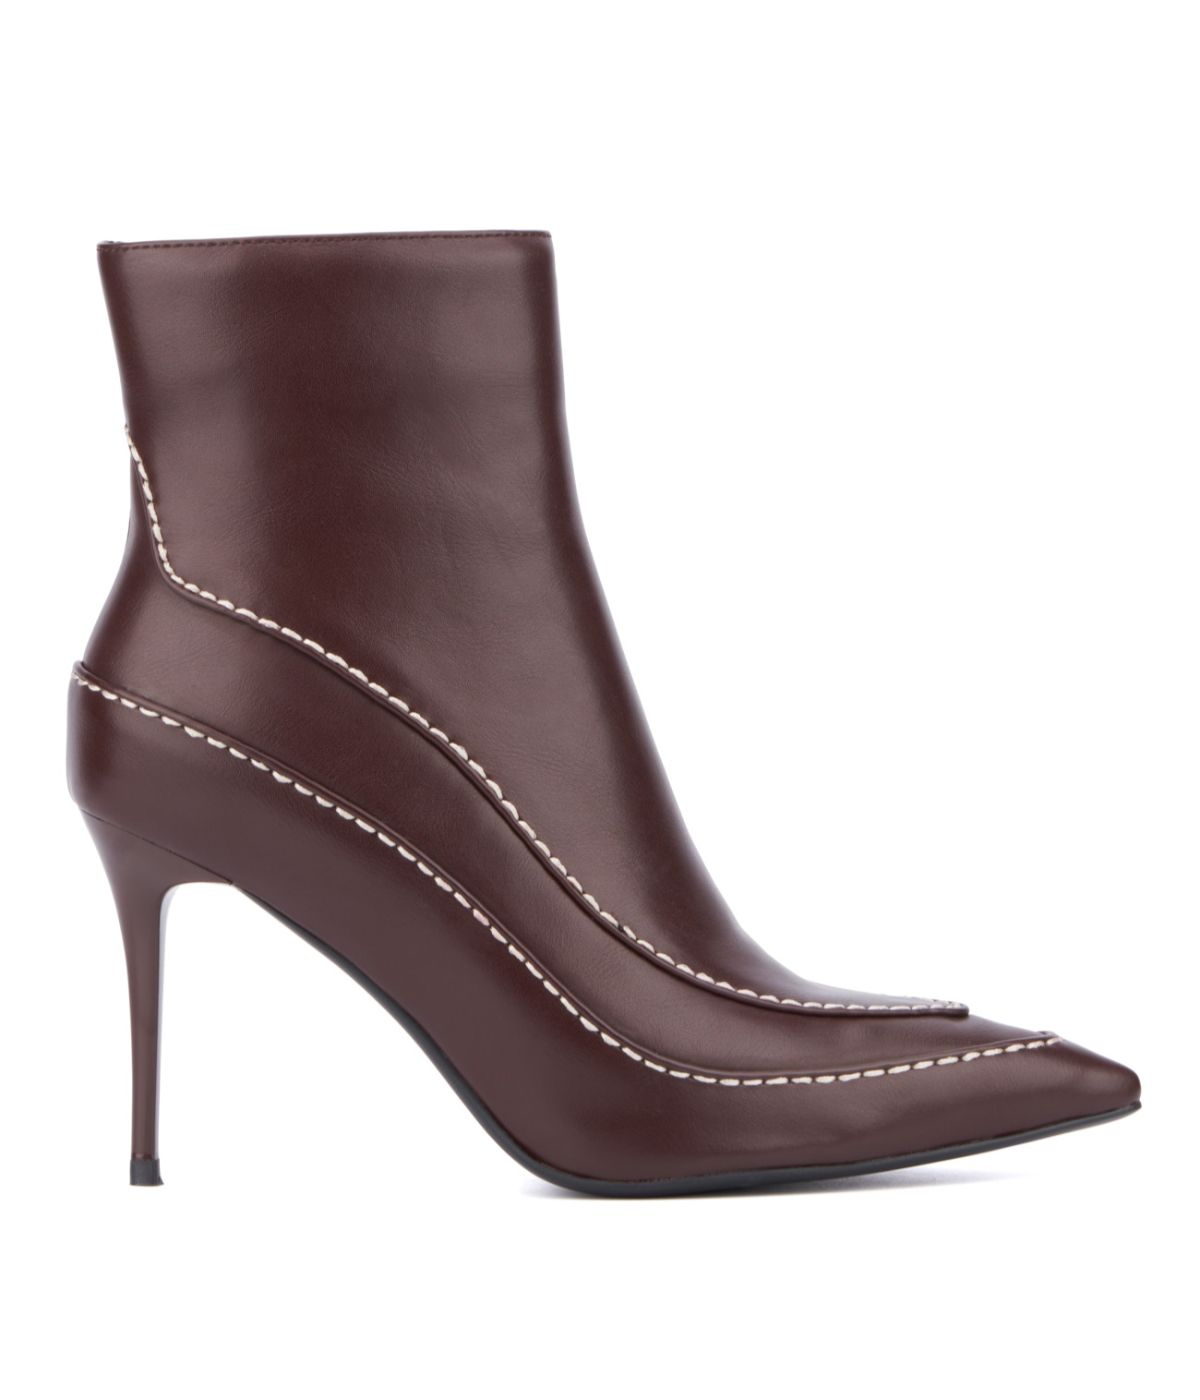 Torgeis Women's Sophie Heeled Boots Brown